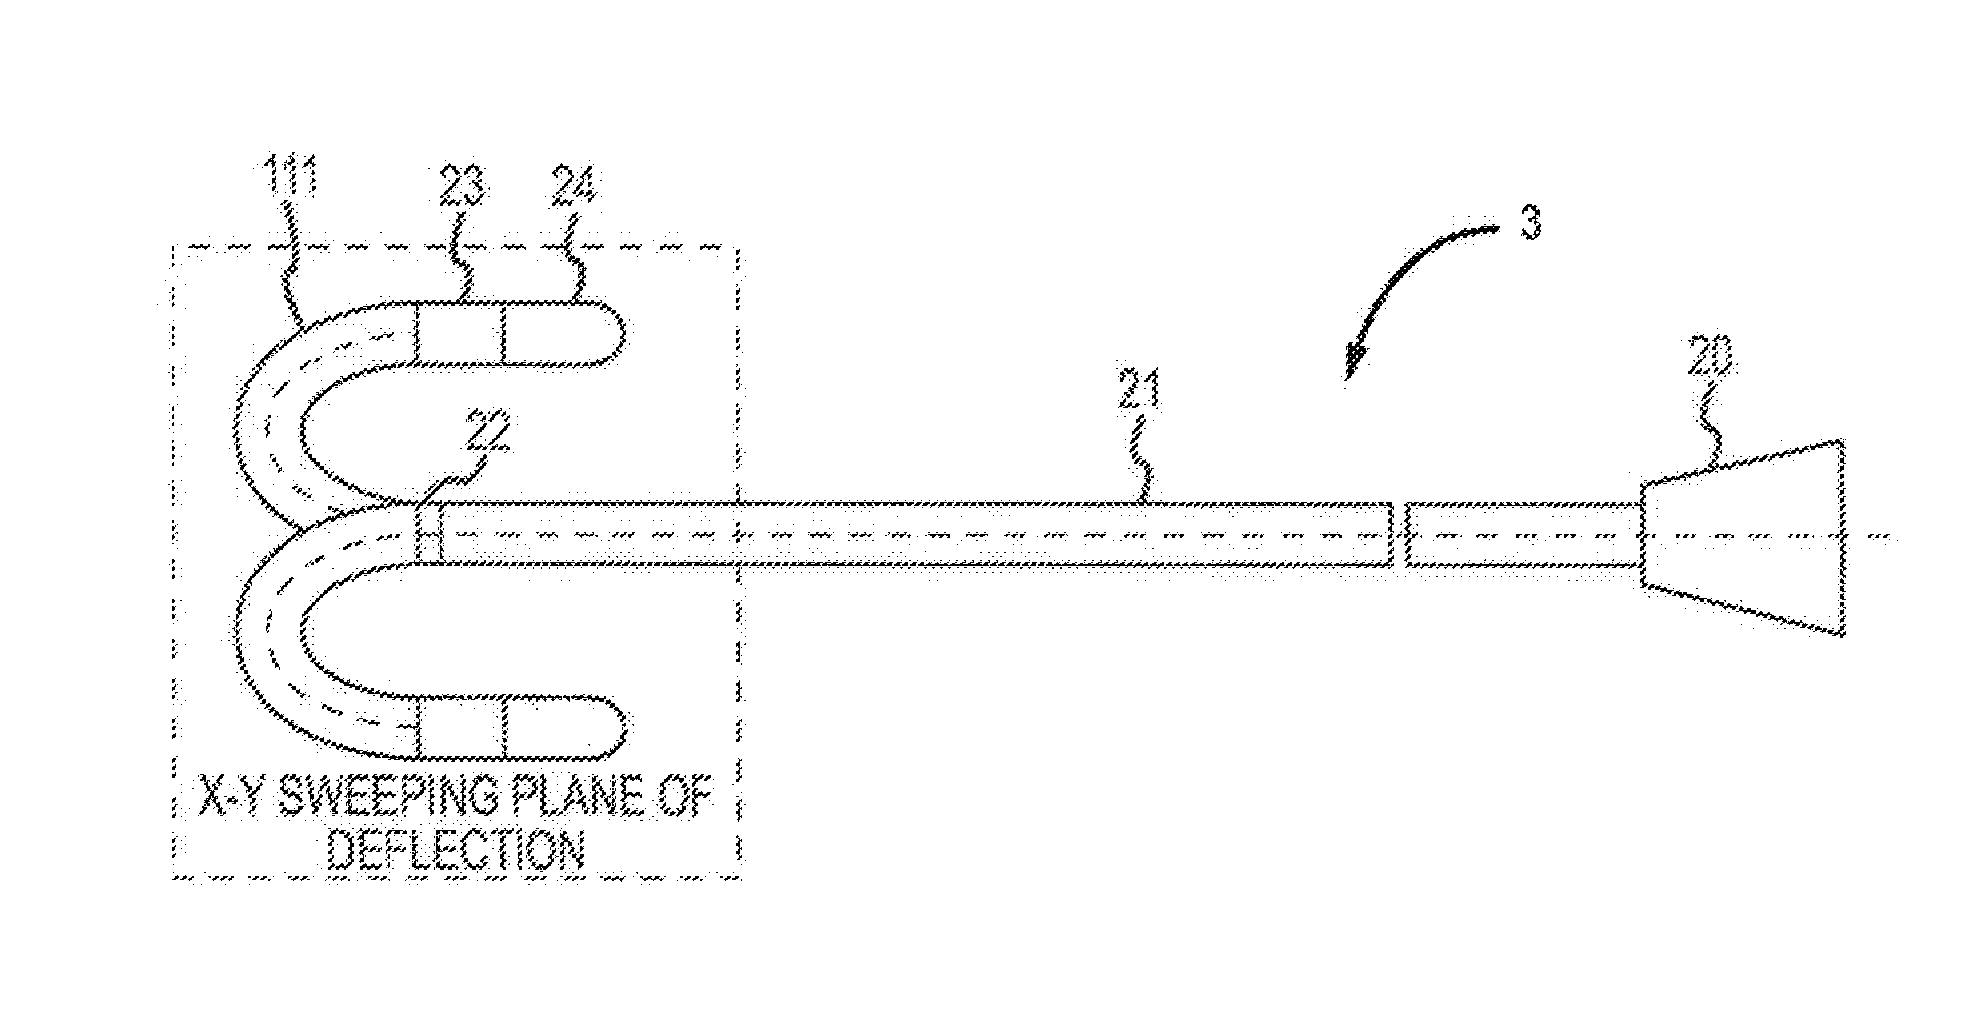 Deflectable Catheter Bodies with Corrugated Tubular Structures